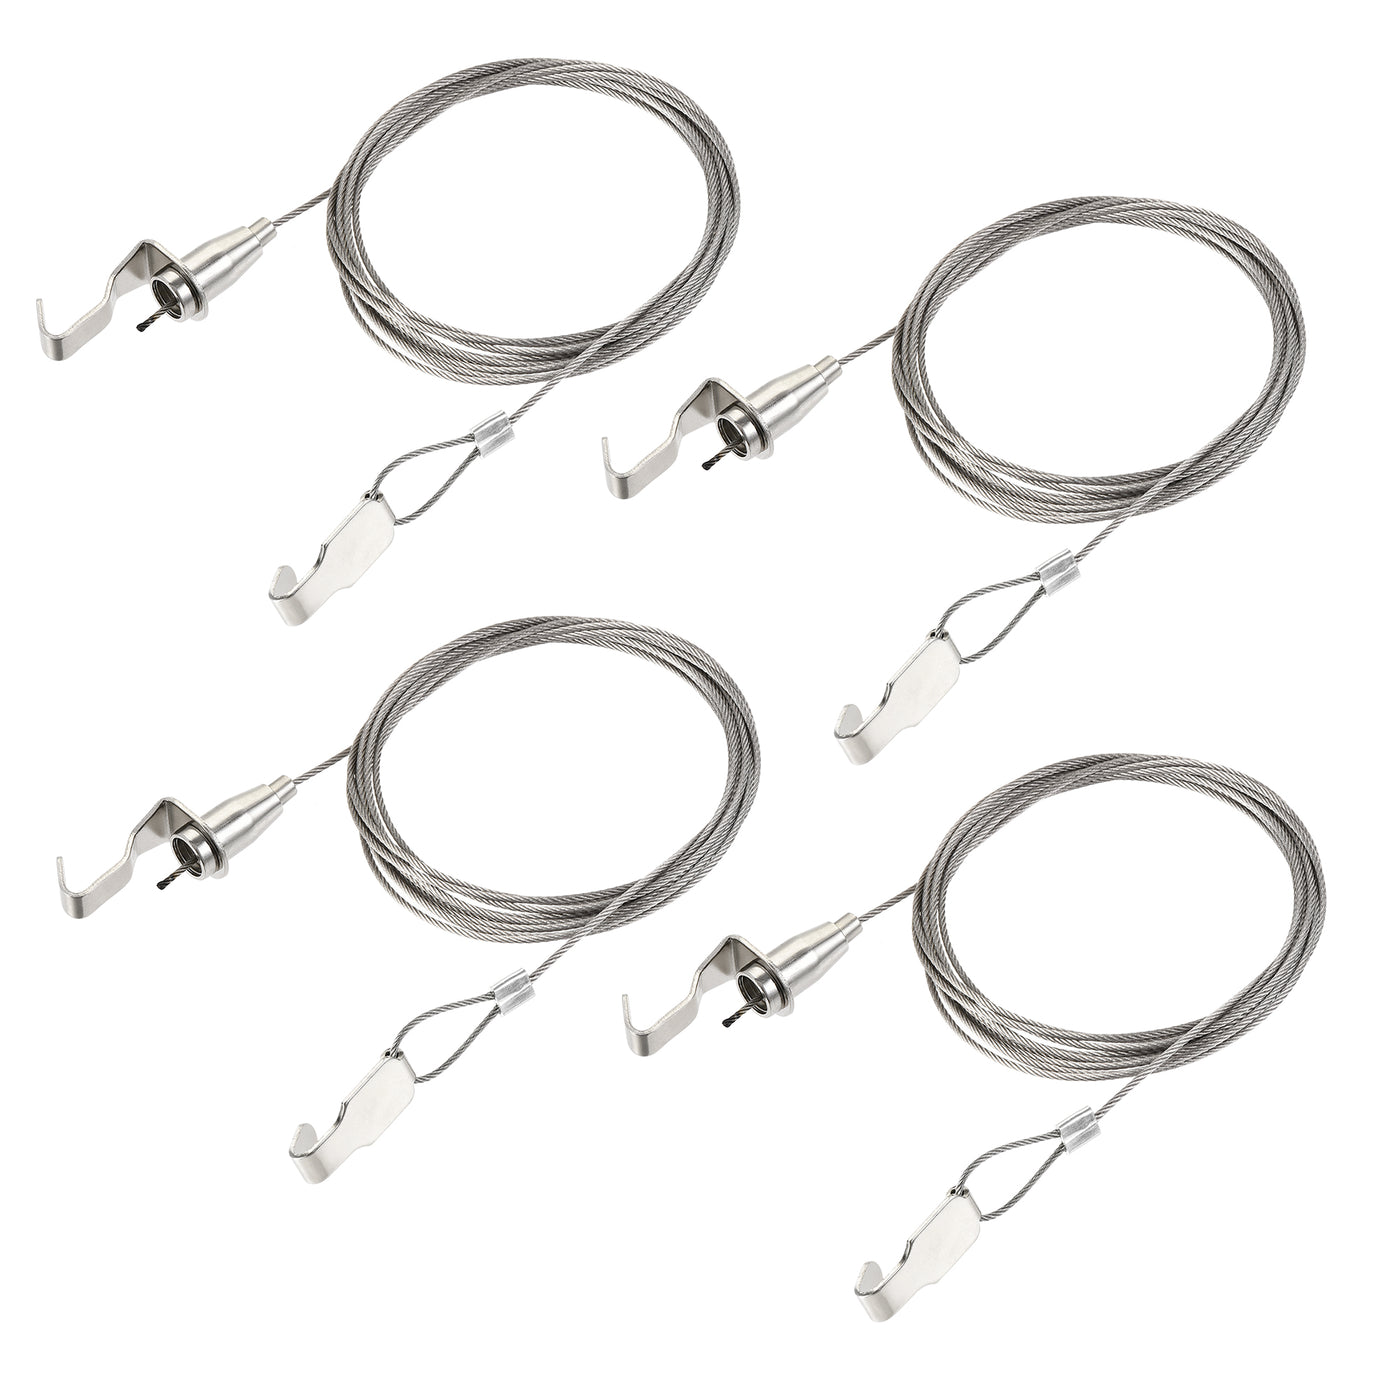 uxcell Uxcell Picture Hanging Wire Kit, 4Set 2.5M Hanging Wire with Small S-Hook for Home Picture Art Gallery Picture Display Kit, Load 66 lbs